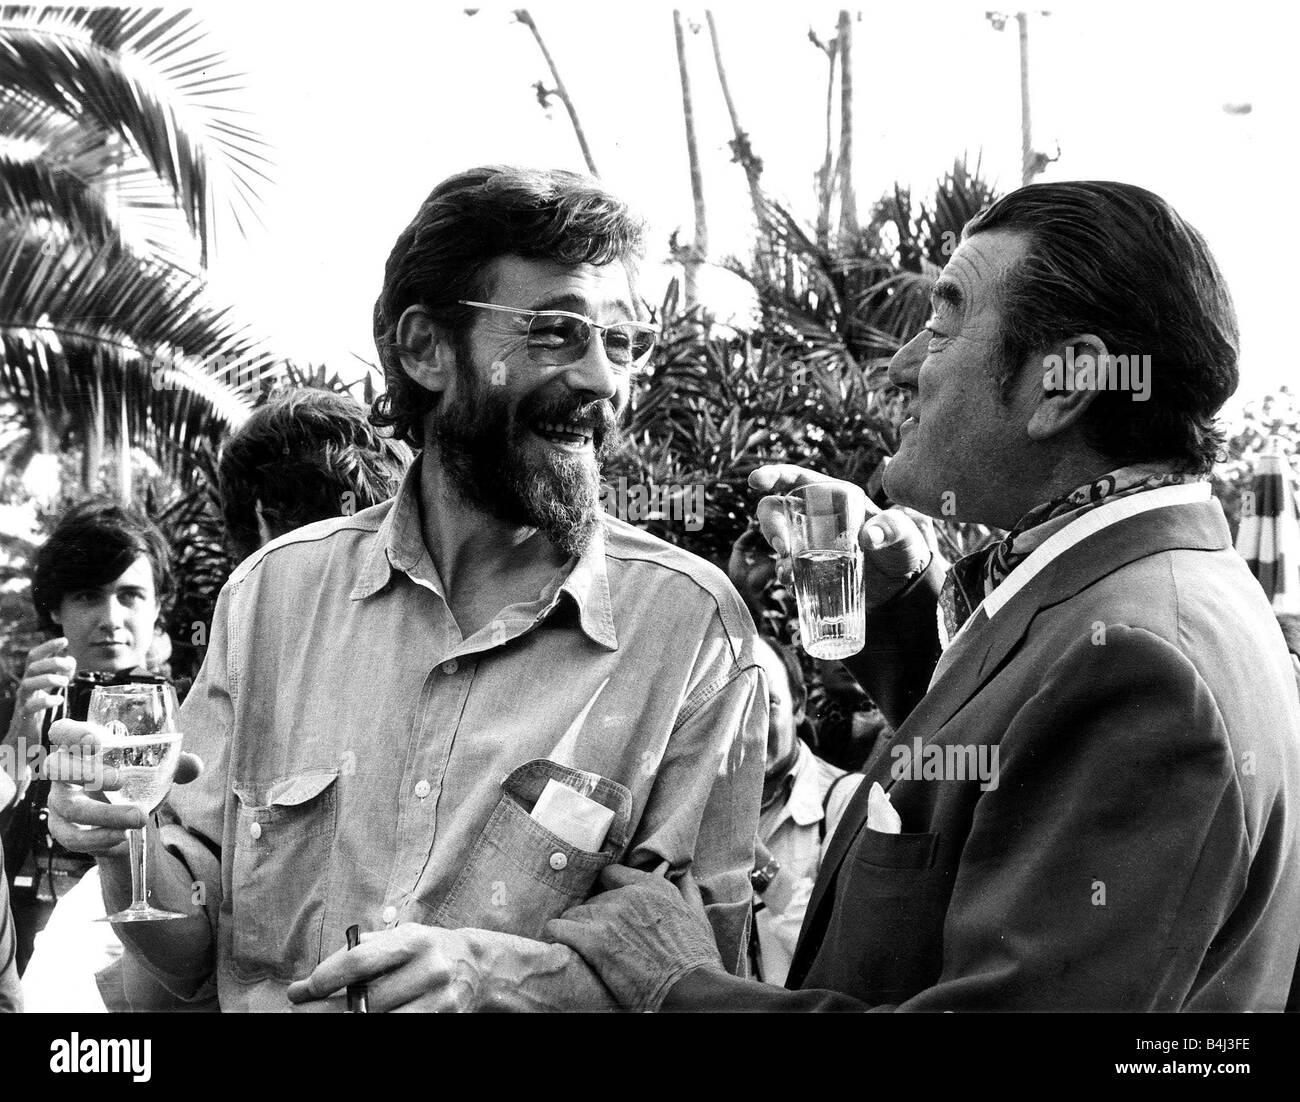 Actor Peter O Toole L May 1972 Chatting to Jack Hawkins at a Cannes champagne party in the South of France at an Annual film festival LMAH003 Stock Photo